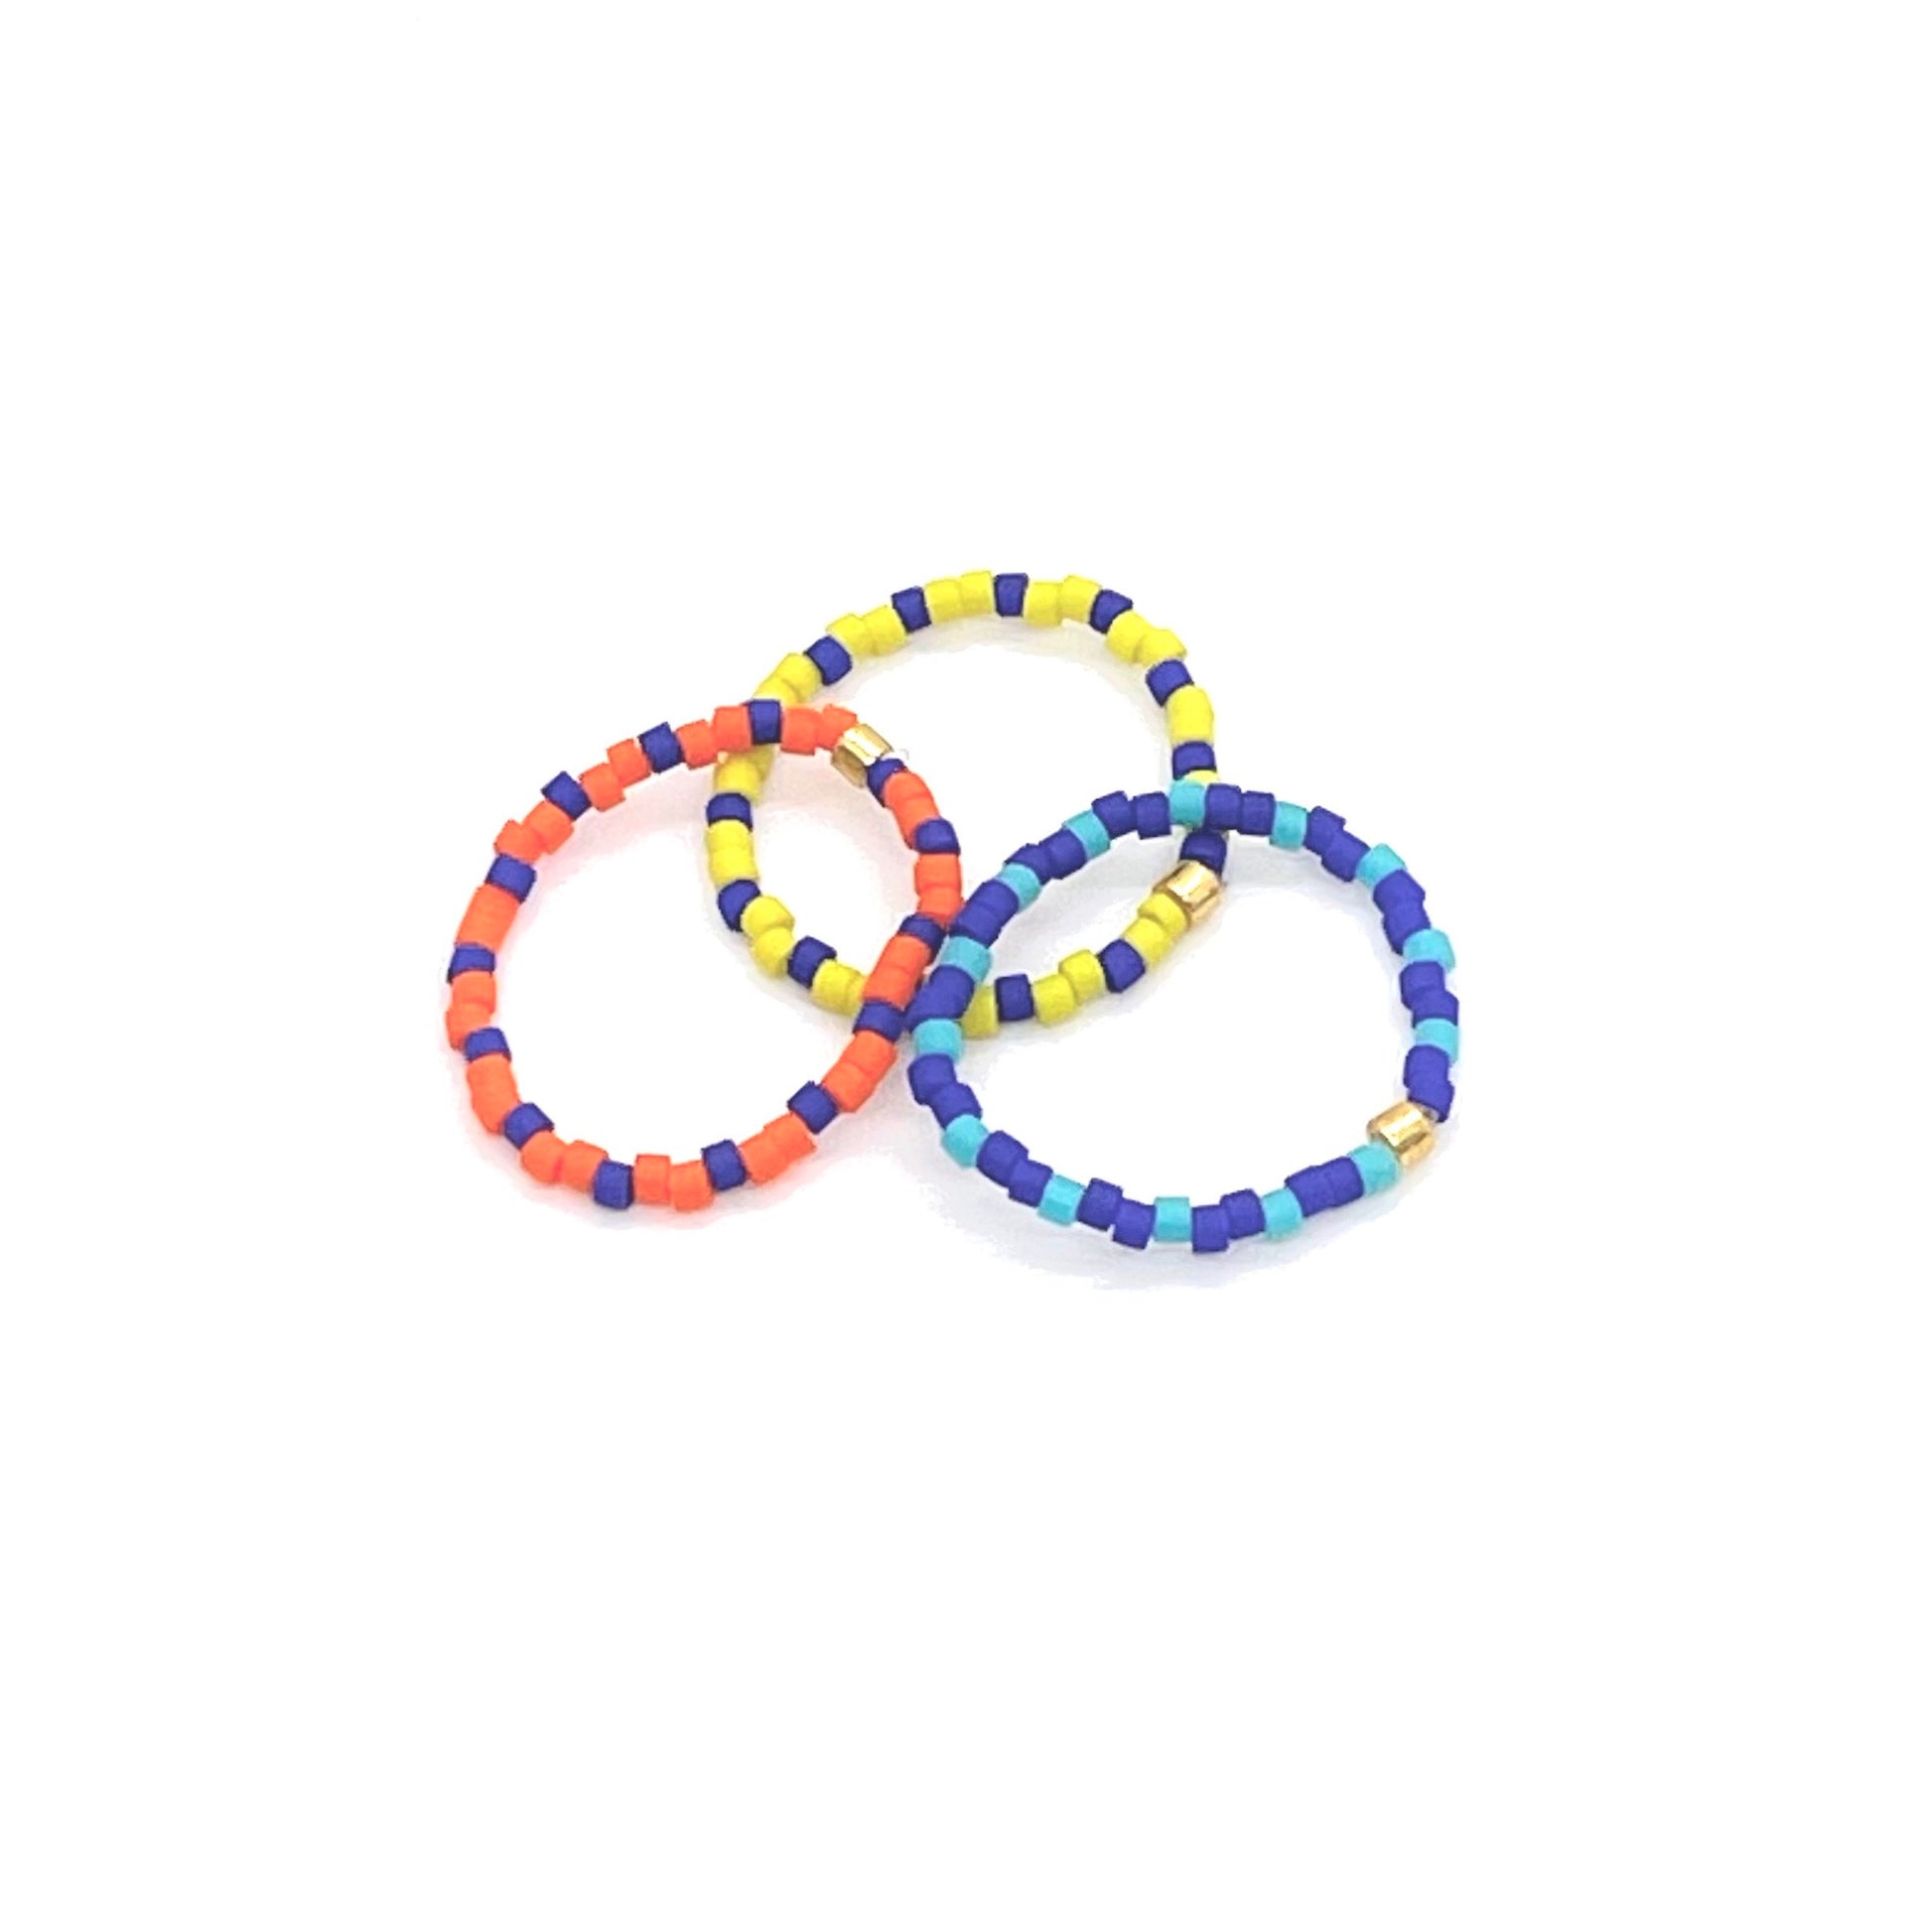 Beaded stretch ring set of 3 with alternating blue, orange, and yellow Miyuki Delica seed beads.